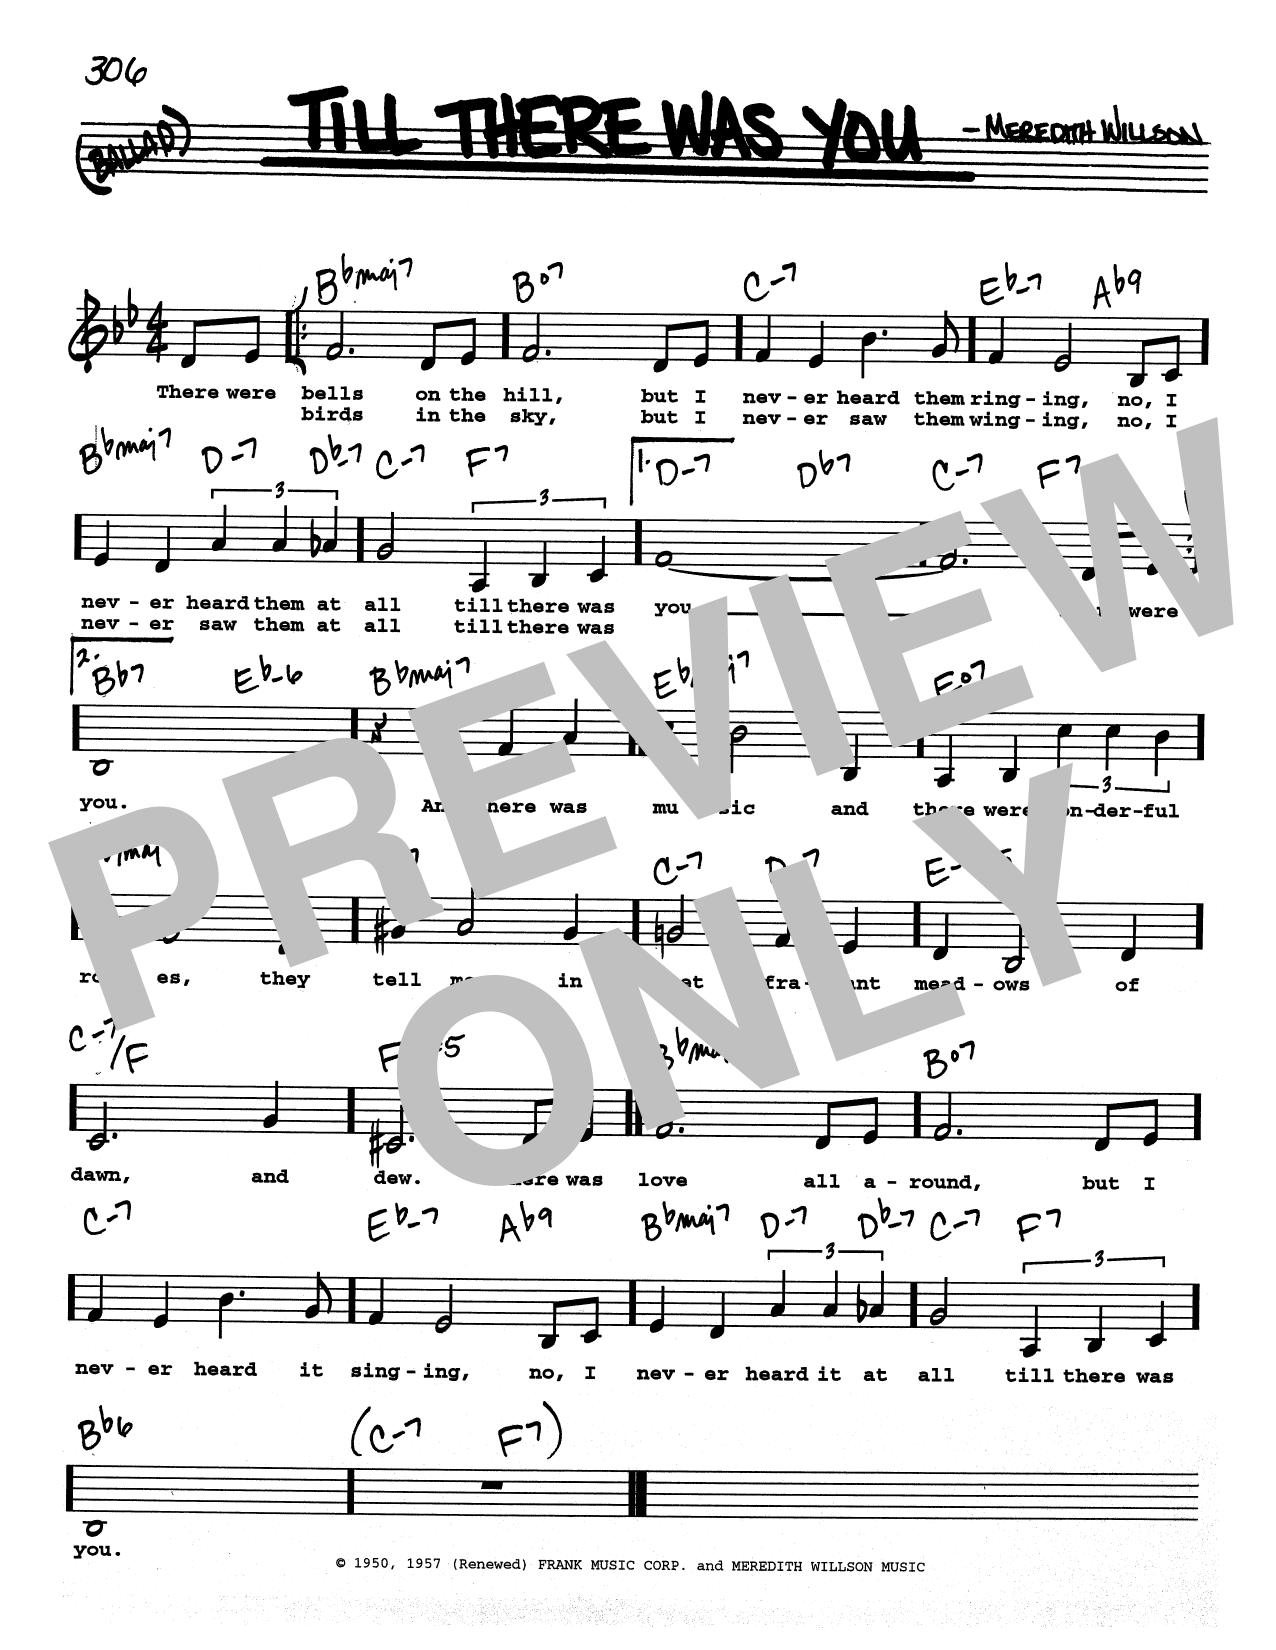 Meredith Willson Till There Was You (Low Voice) sheet music notes printable PDF score